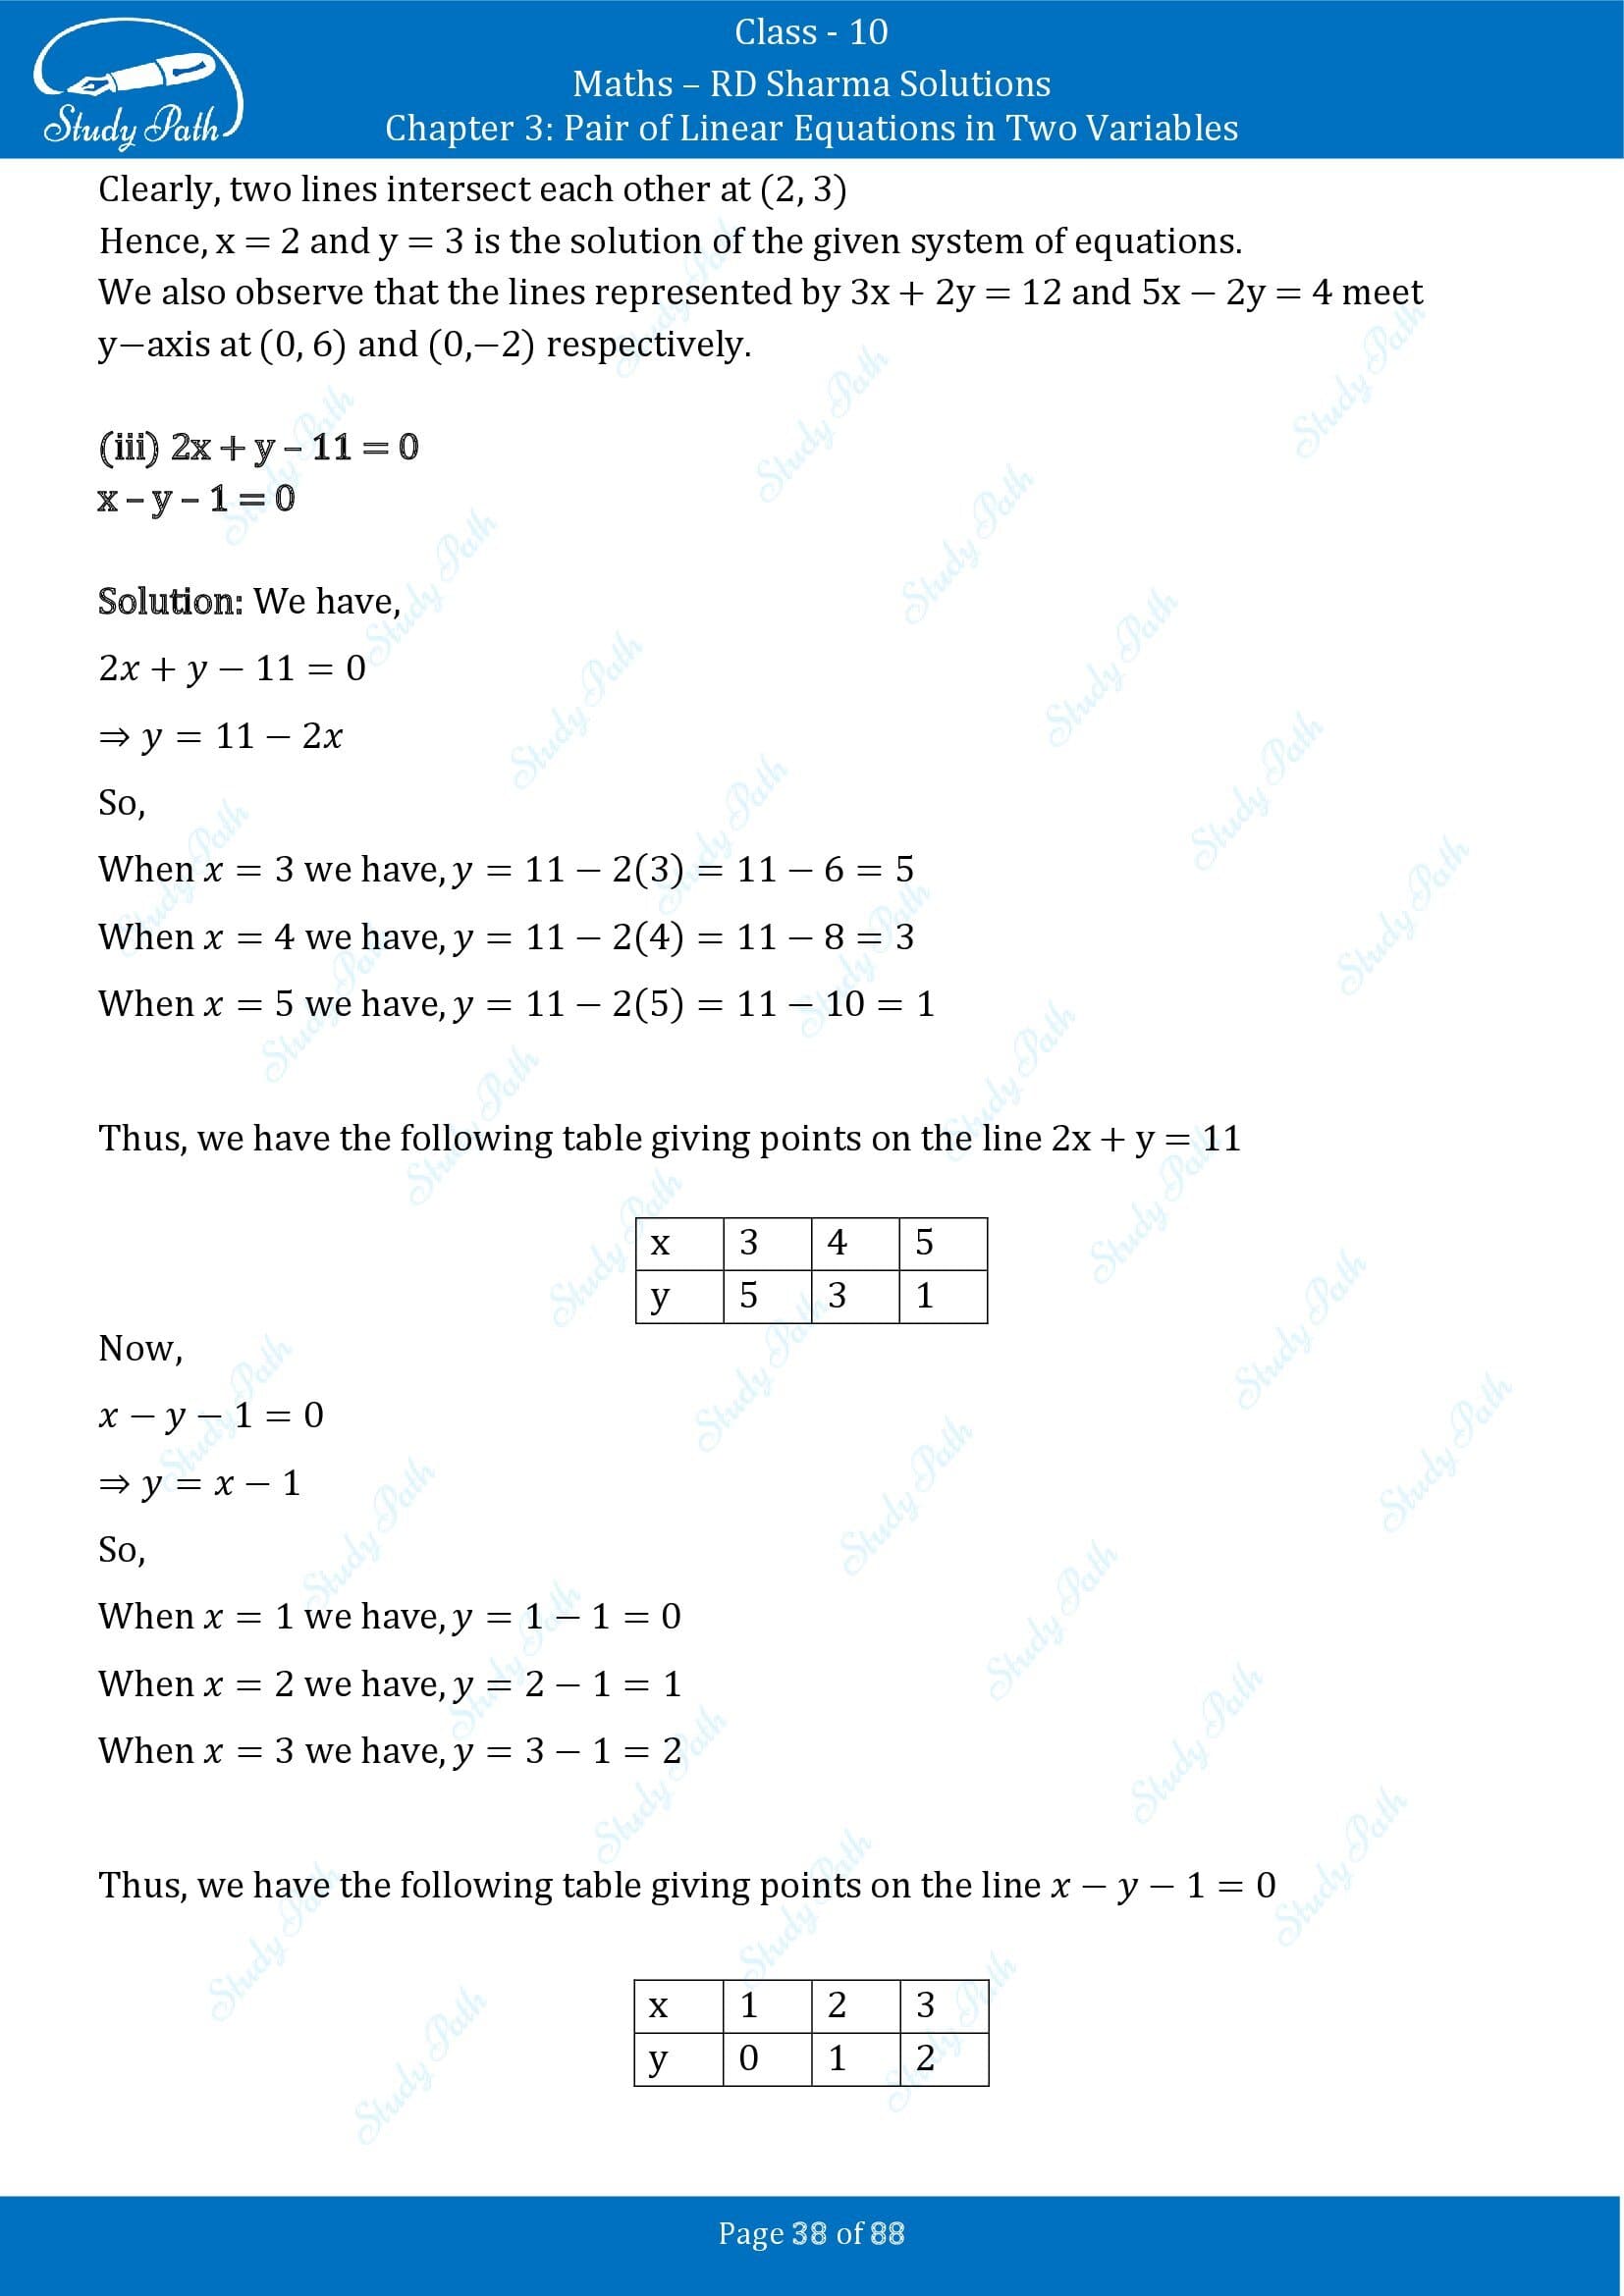 RD Sharma Solutions Class 10 Chapter 3 Pair of Linear Equations in Two Variables Exercise 3.2 00038